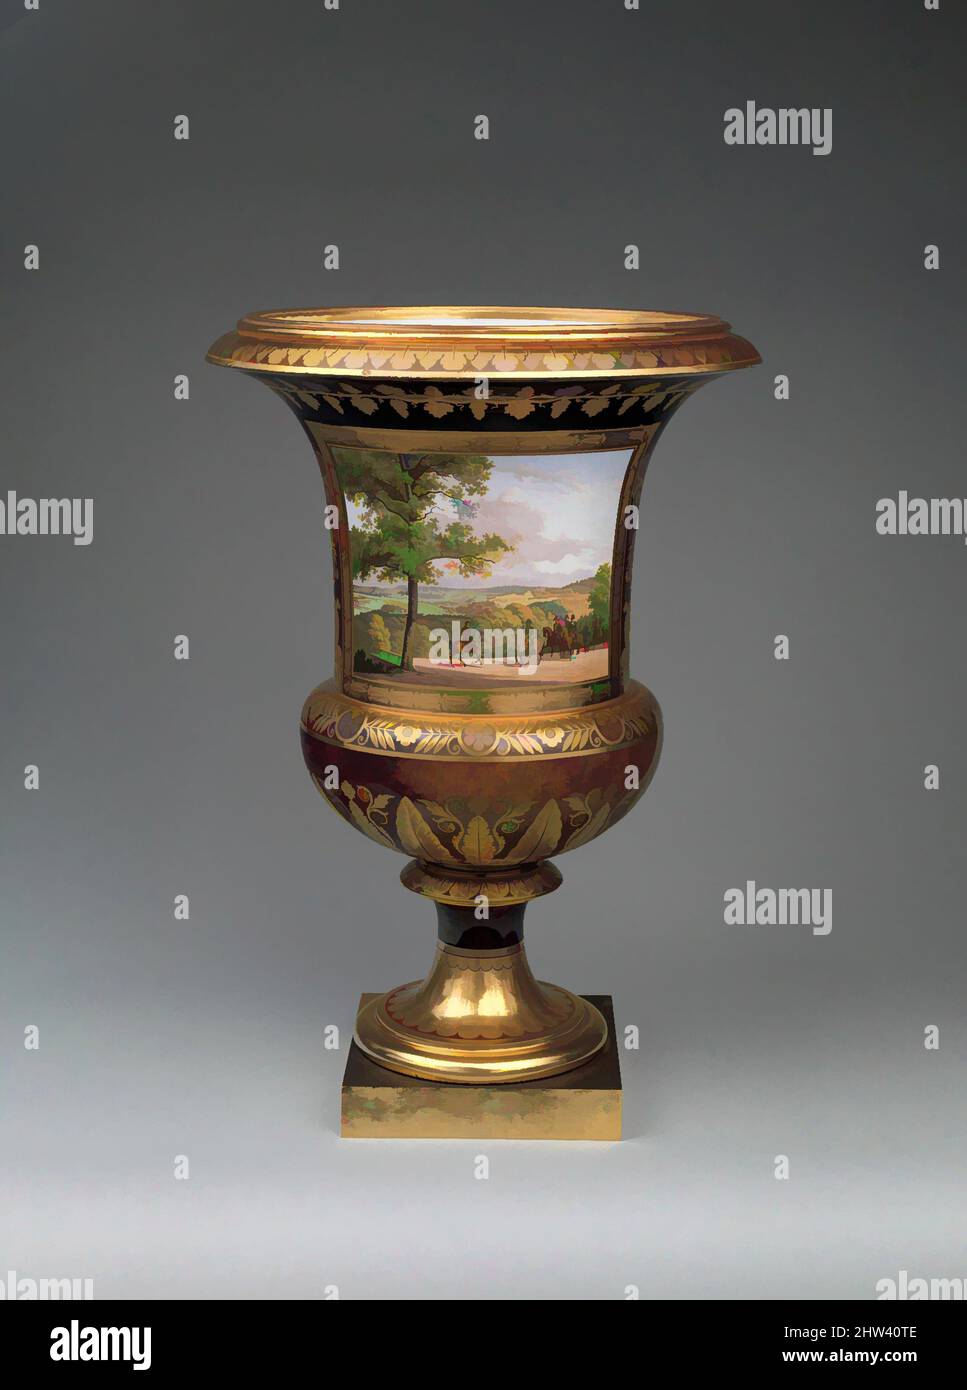 Art inspired by Medici vase with a scene of the park at Saint-Cloud (one of a pair), 1811, French, Sèvres, Hard-paste porcelain, gilt bronze, Overall (confirmed): 27 1/4 x 18 1/2 x 18 1/2 in. (69.2 x 47 x 47 cm), Ceramics-Porcelain, Jean François Robert (French, Chantilly 1778–1832, Classic works modernized by Artotop with a splash of modernity. Shapes, color and value, eye-catching visual impact on art. Emotions through freedom of artworks in a contemporary way. A timeless message pursuing a wildly creative new direction. Artists turning to the digital medium and creating the Artotop NFT Stock Photo